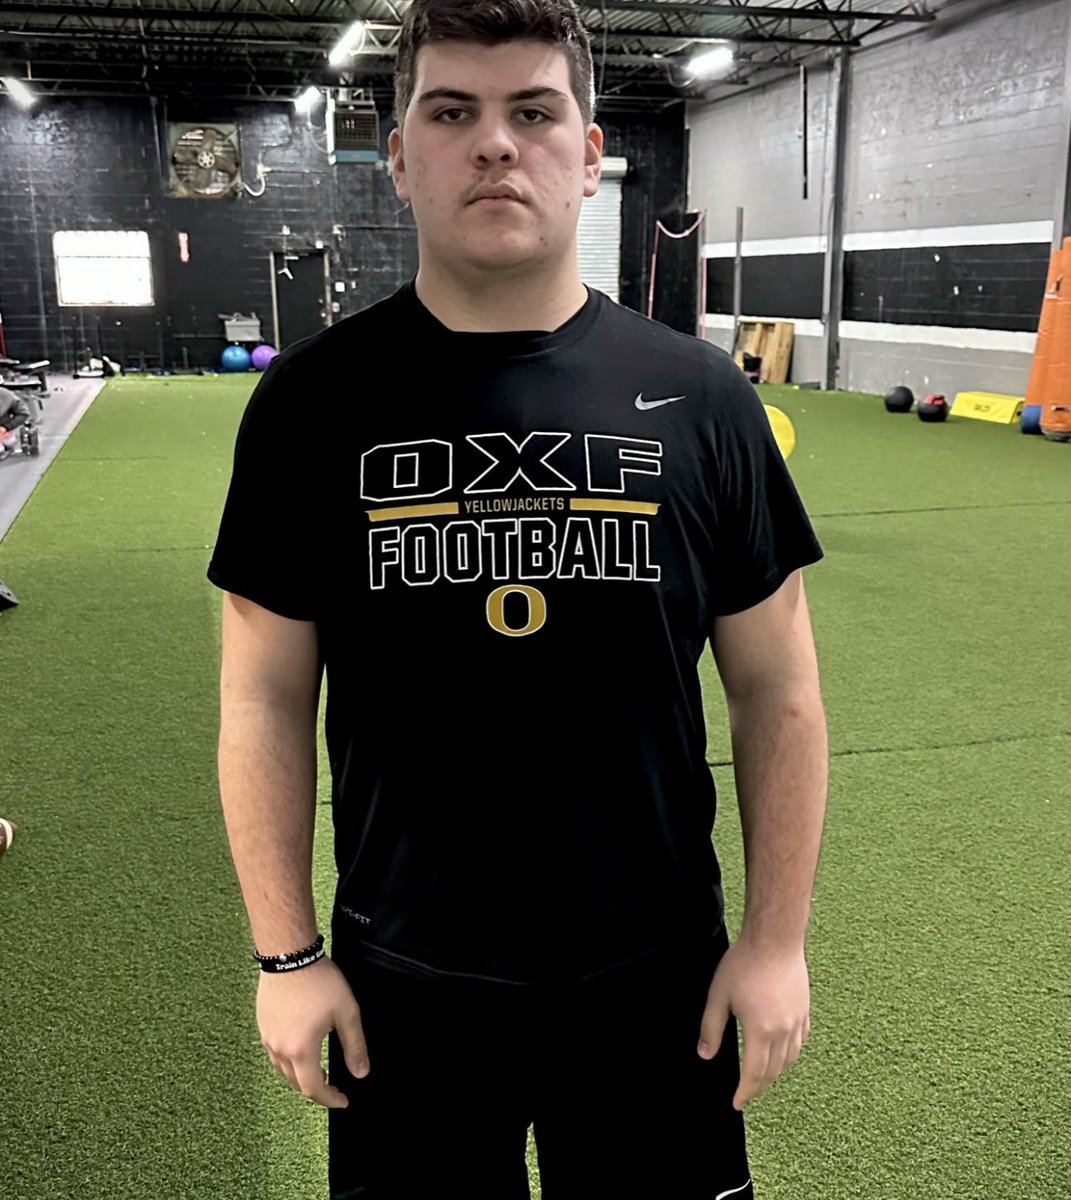 Are there anymore camps comin up before the collegiate camps begin in June? (Late March - Late May)
Preferably somewhere between Birmingham & Atlanta…..🙏🏻👀
#FootballCamps #HighSchoolFootball
Askin for my son, pictured. C/o ‘24, 6’4, 280, OT, 3.4 GPA, 75.5” Wingspan, Oxford High